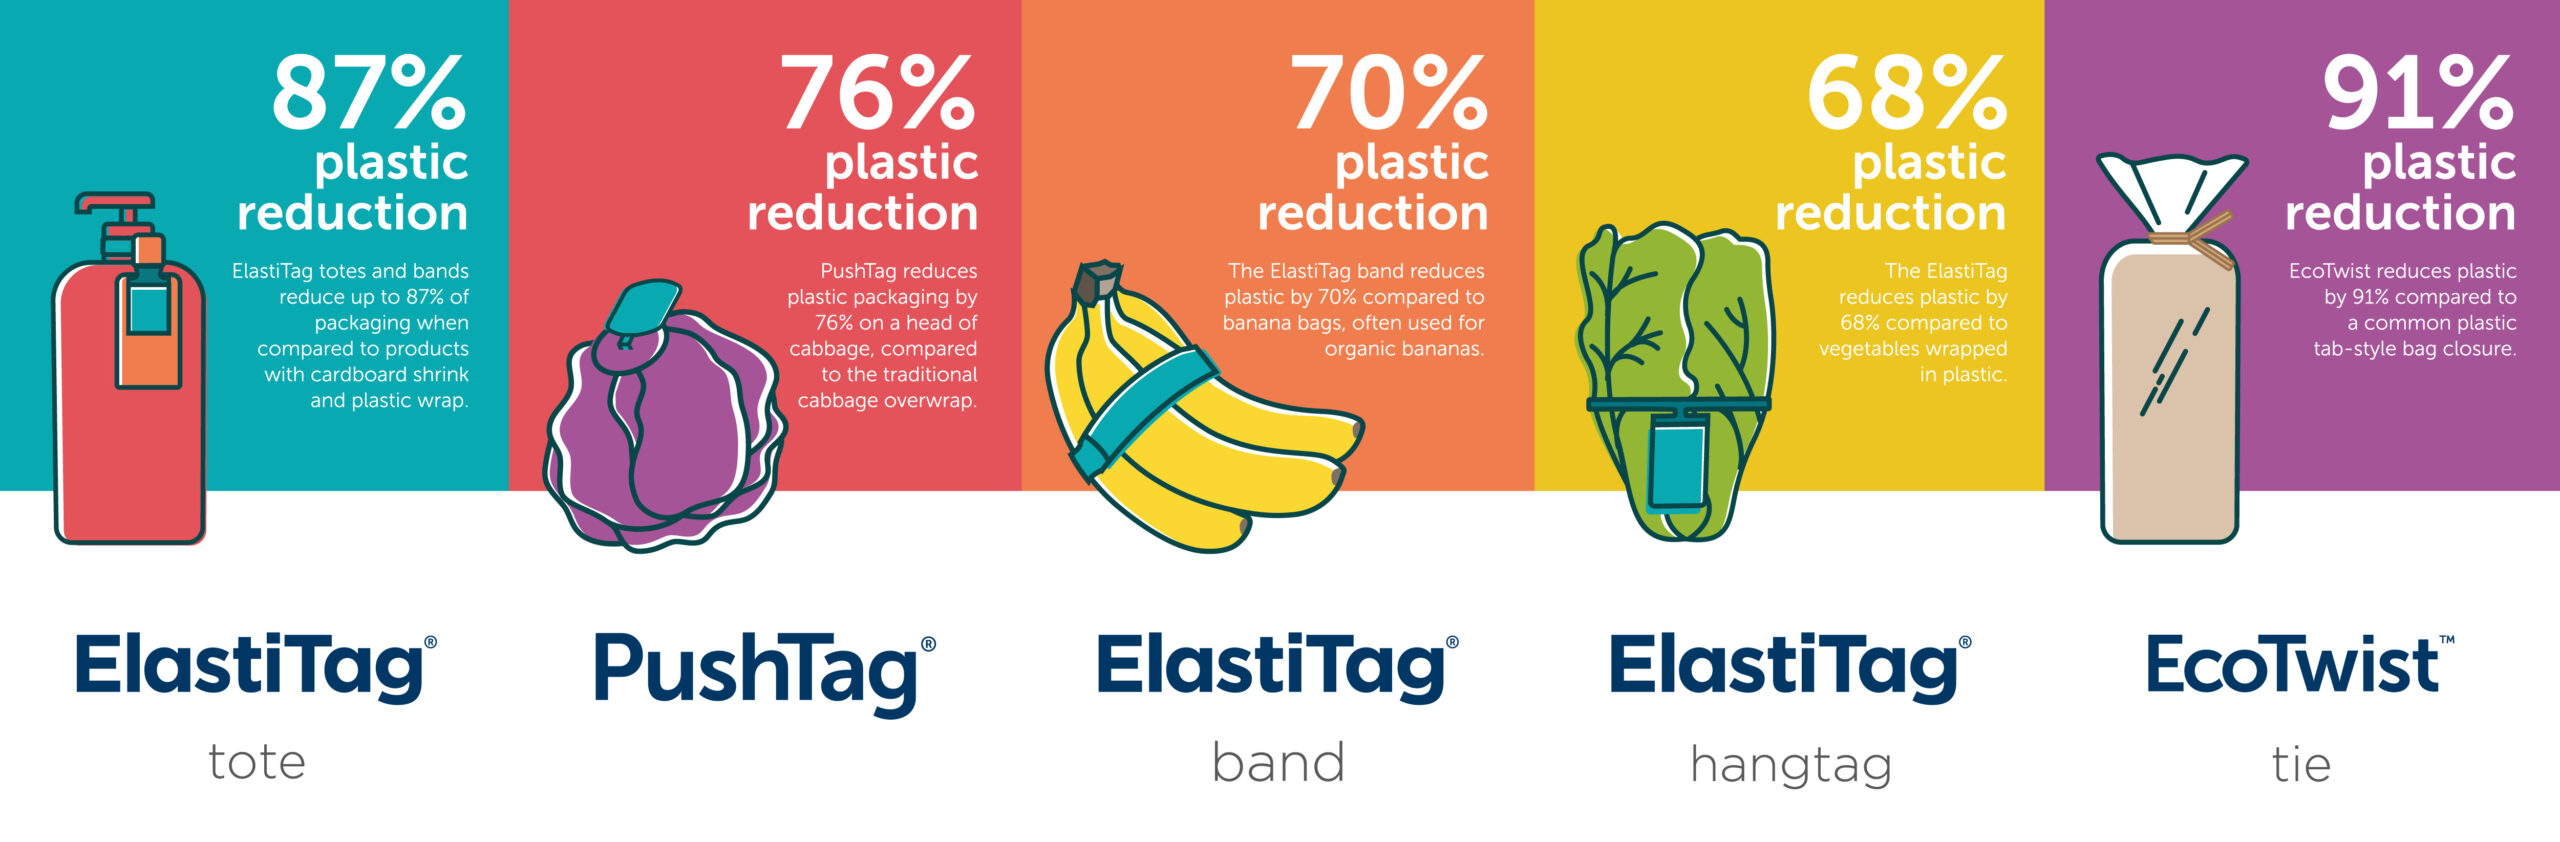 A colorful illustration of Bedford packaging solutions organized by percentage of plastic each reduces, the highest being 91%